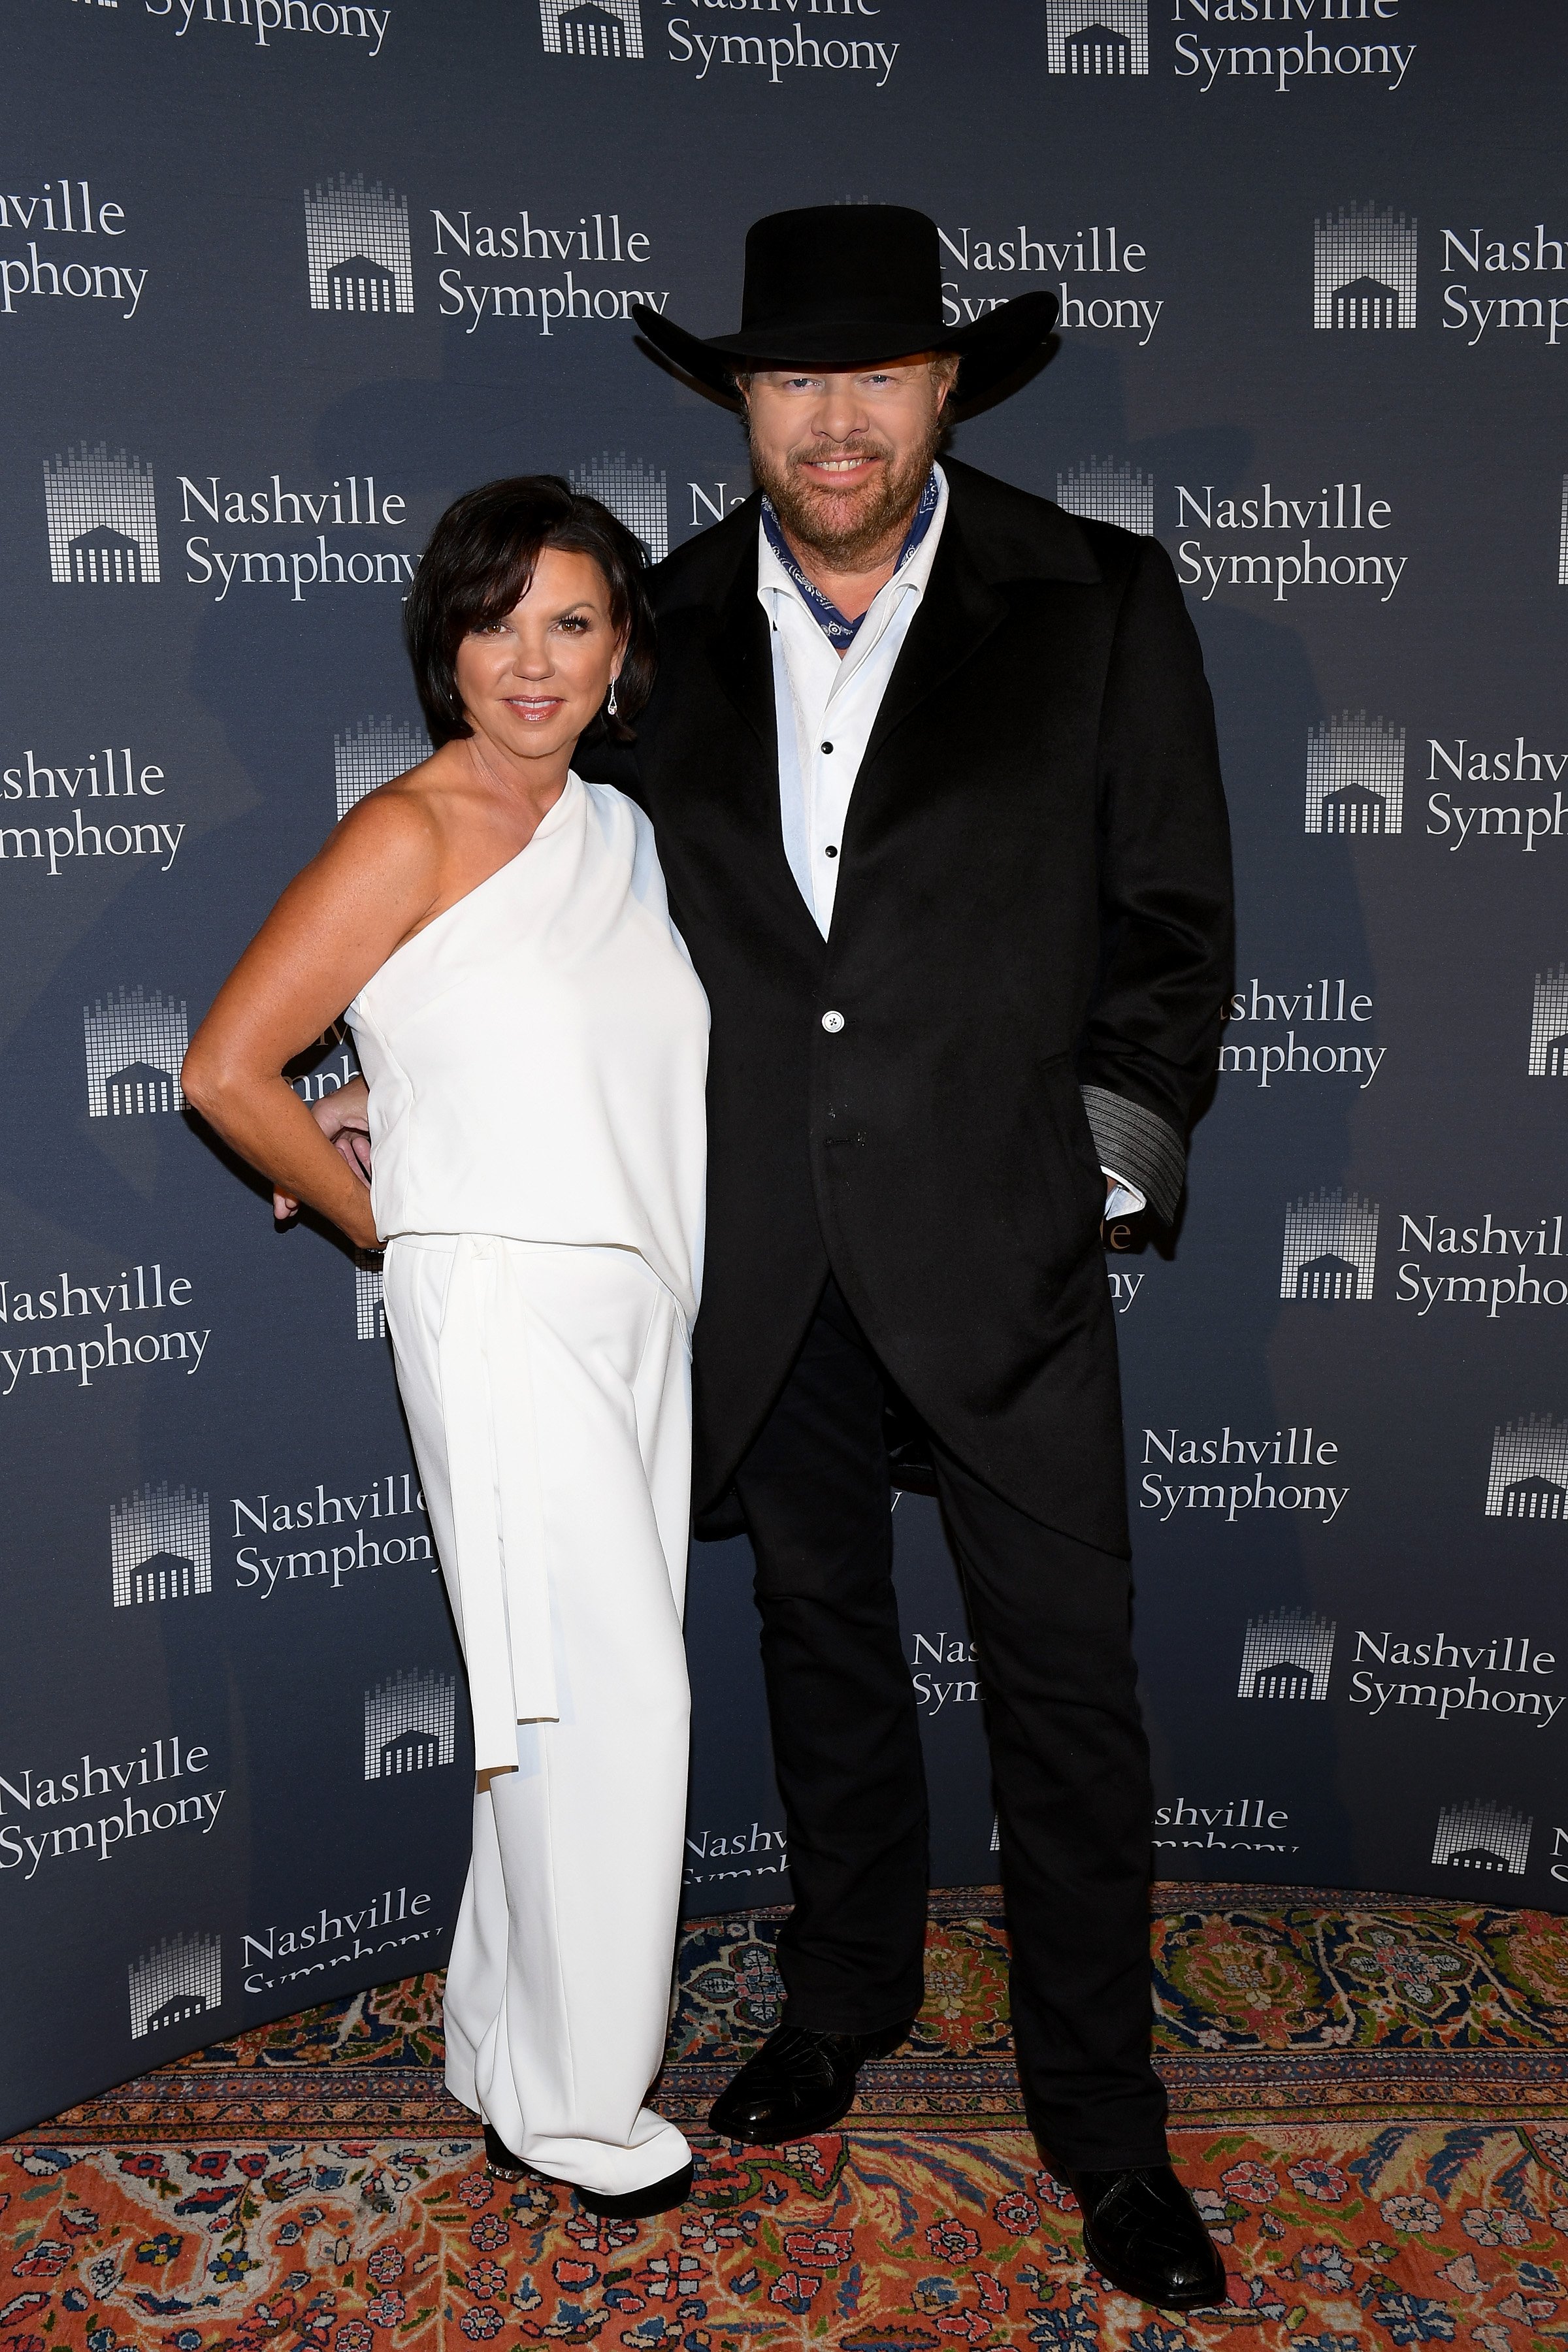 Tricia Lucus and Toby Keith attend the 34th Annual Nashville Symphony Ball at Schermerhorn Symphony Center on December 8, 2018, in Nashville, Tennessee. | Source: Getty Images